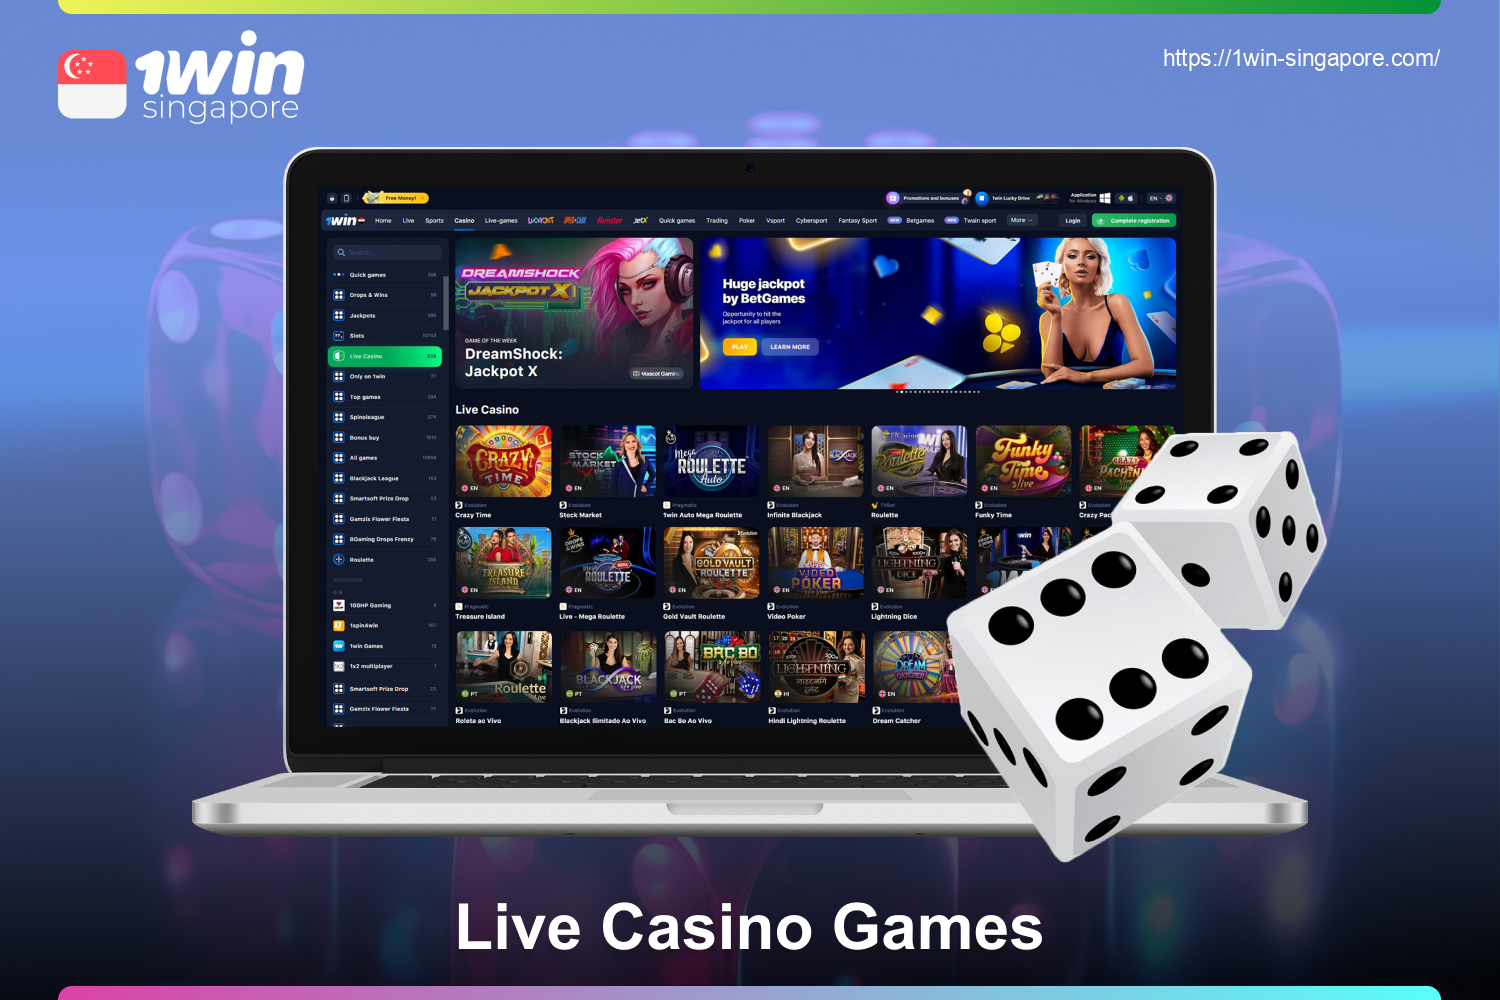 All live entertainment at 1win Casino Singapore is collected in a separate section